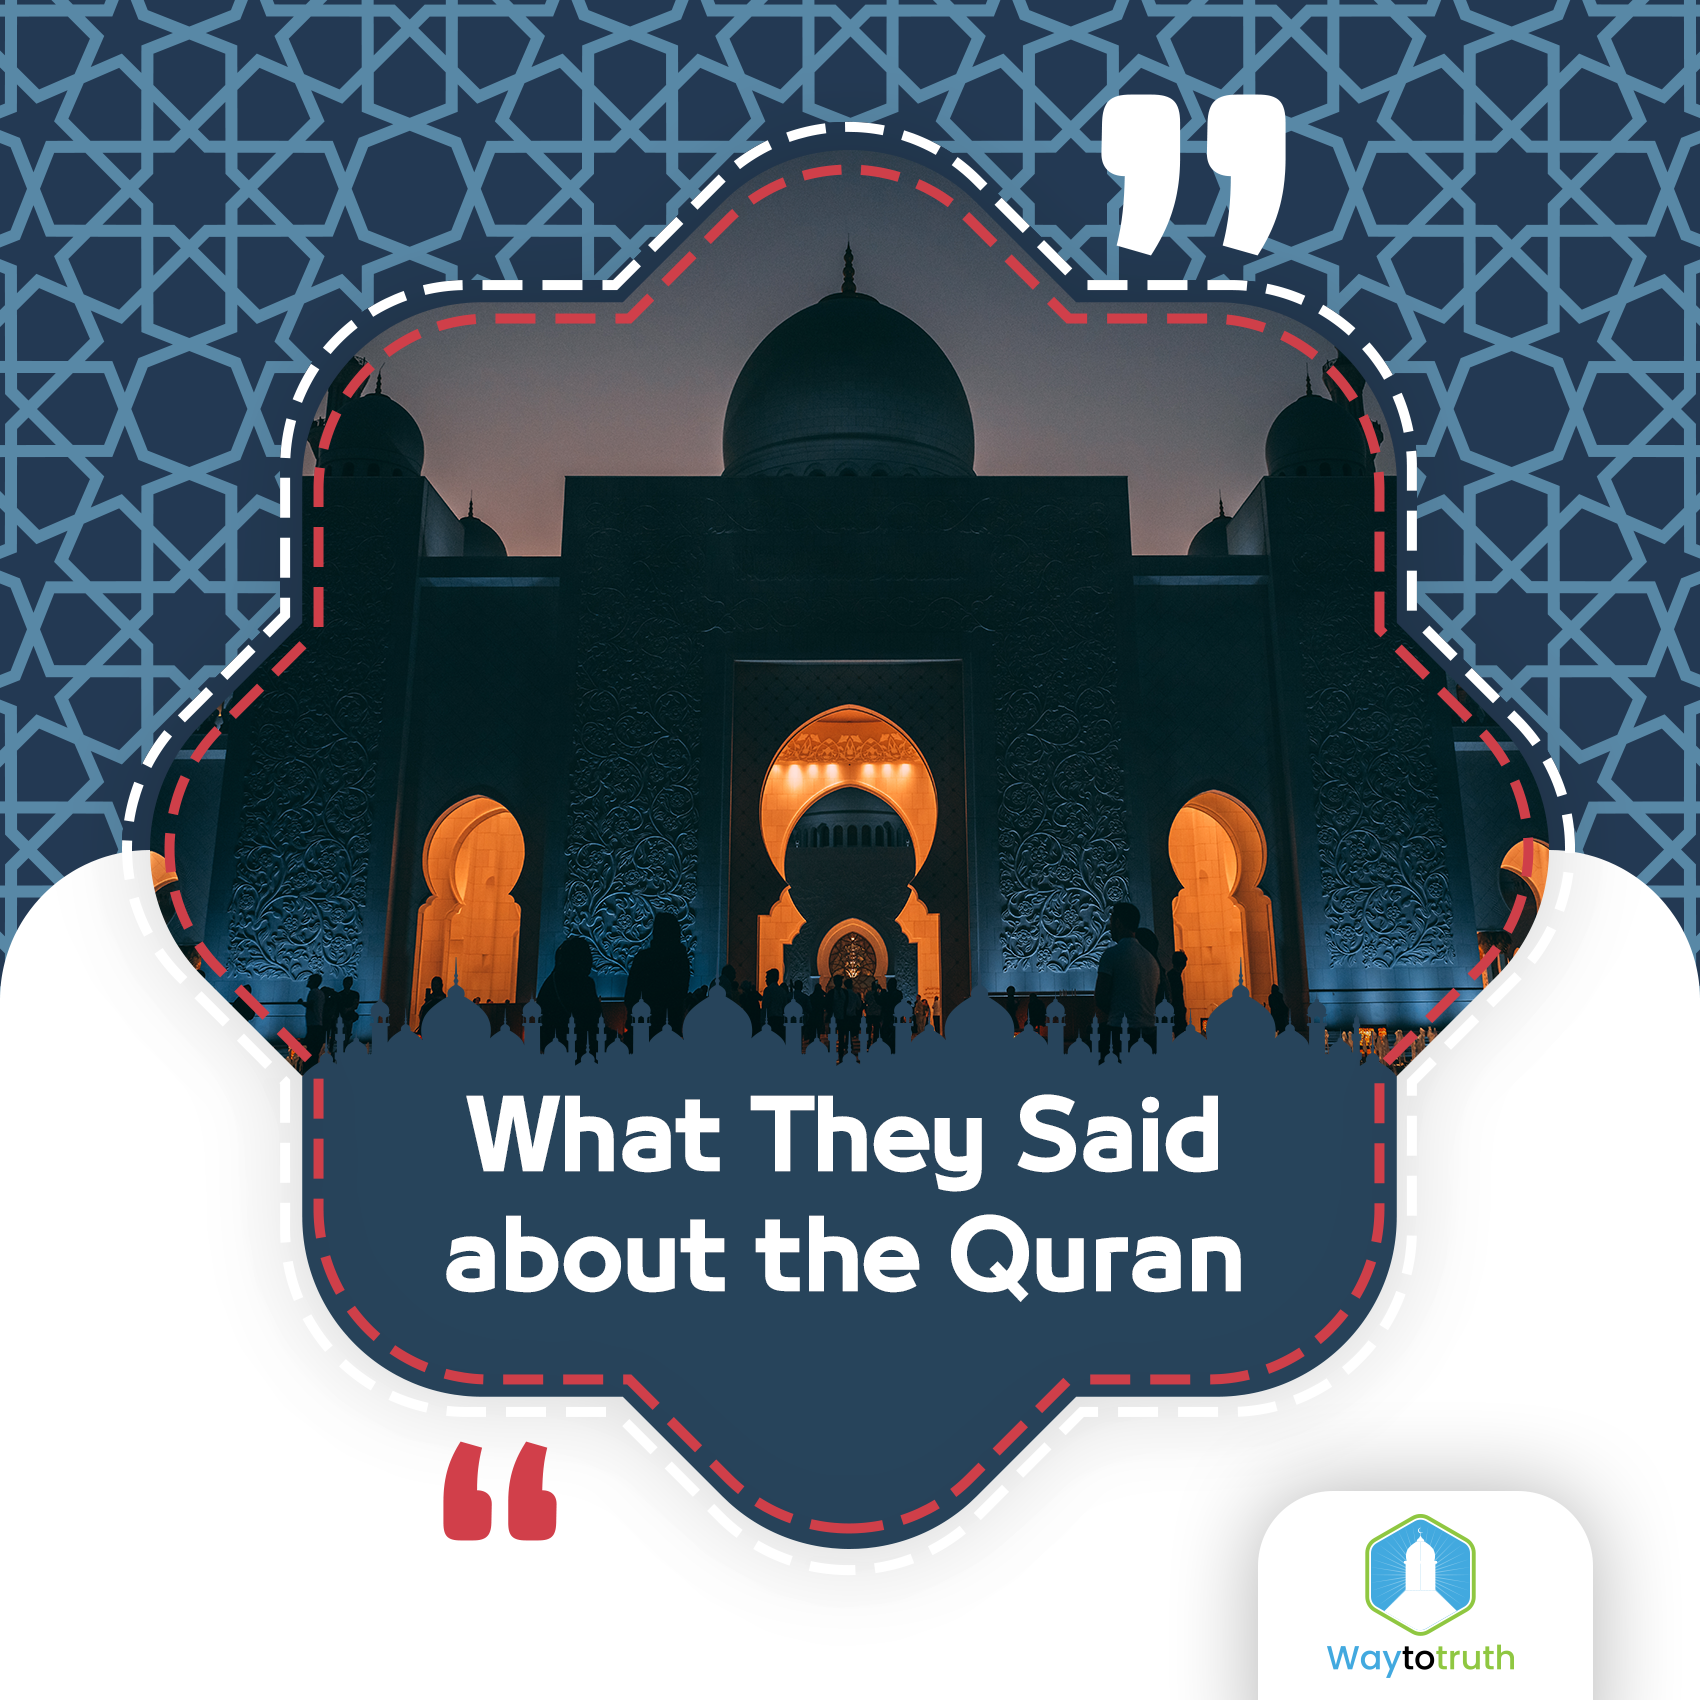 What They Said about the Quran